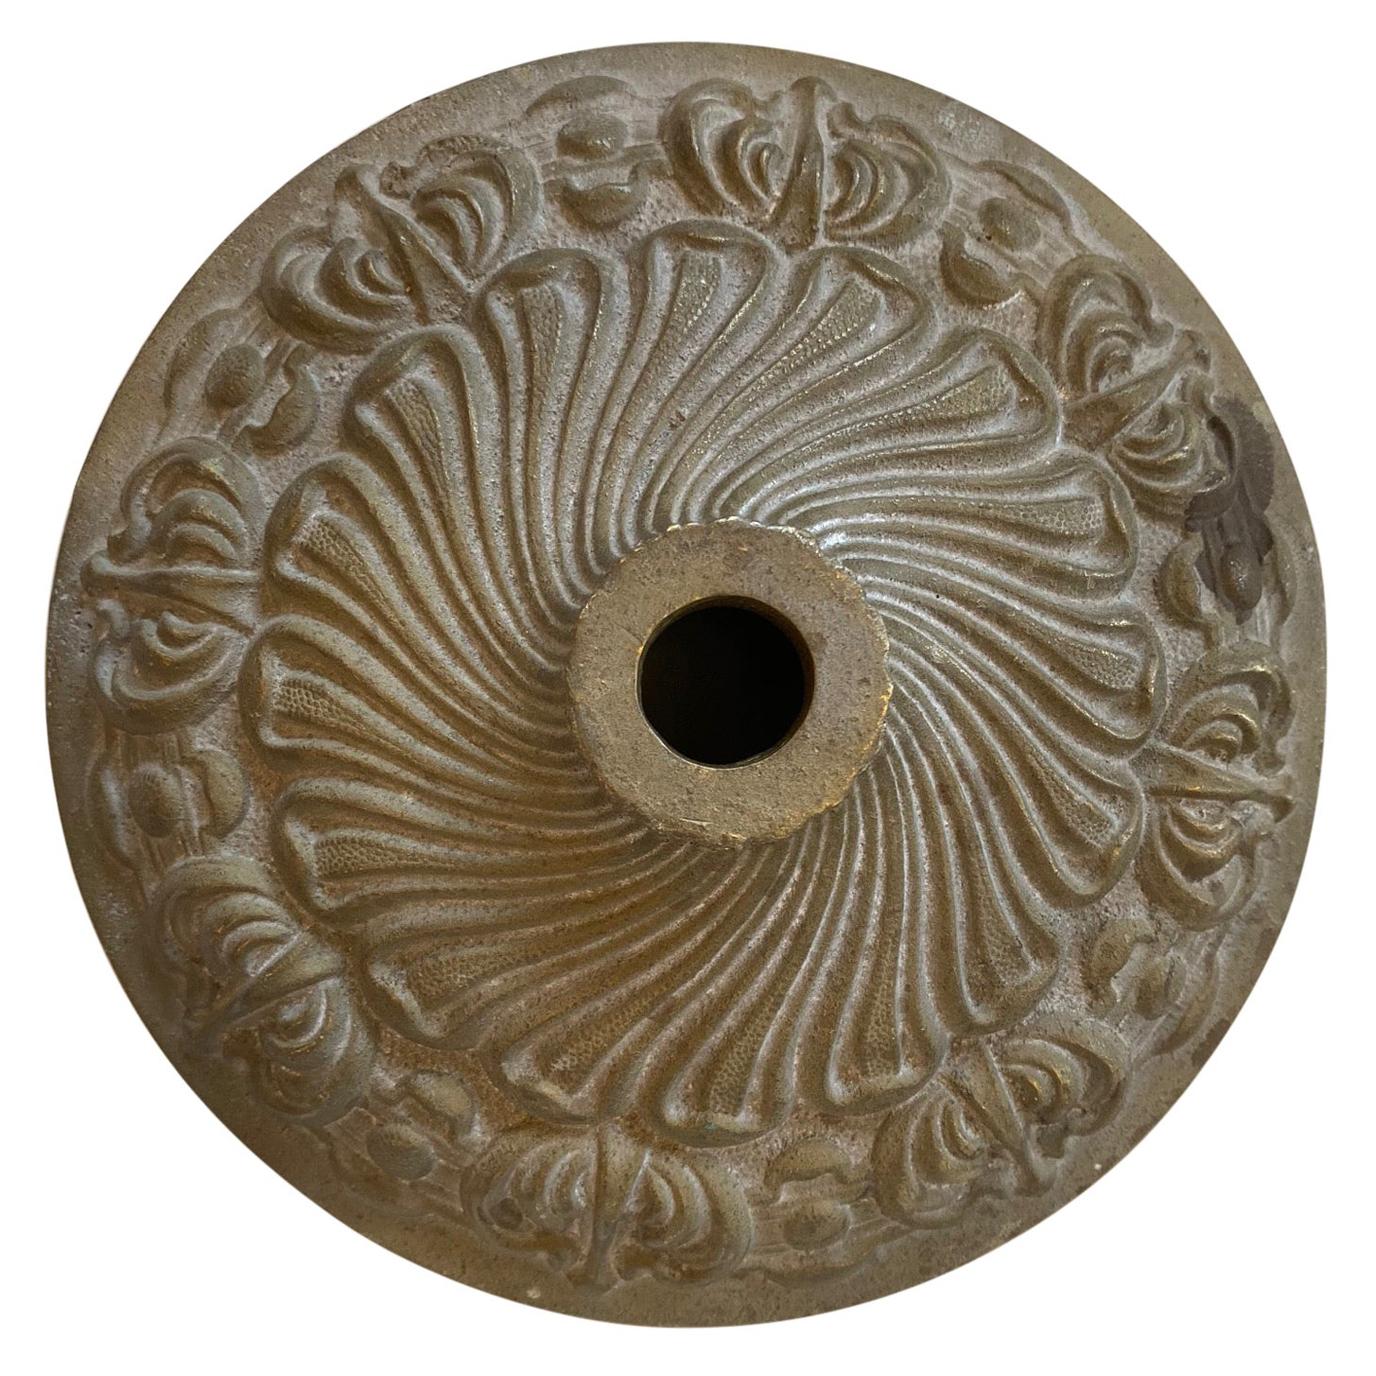 Carved Brass Escutcheon with Florets